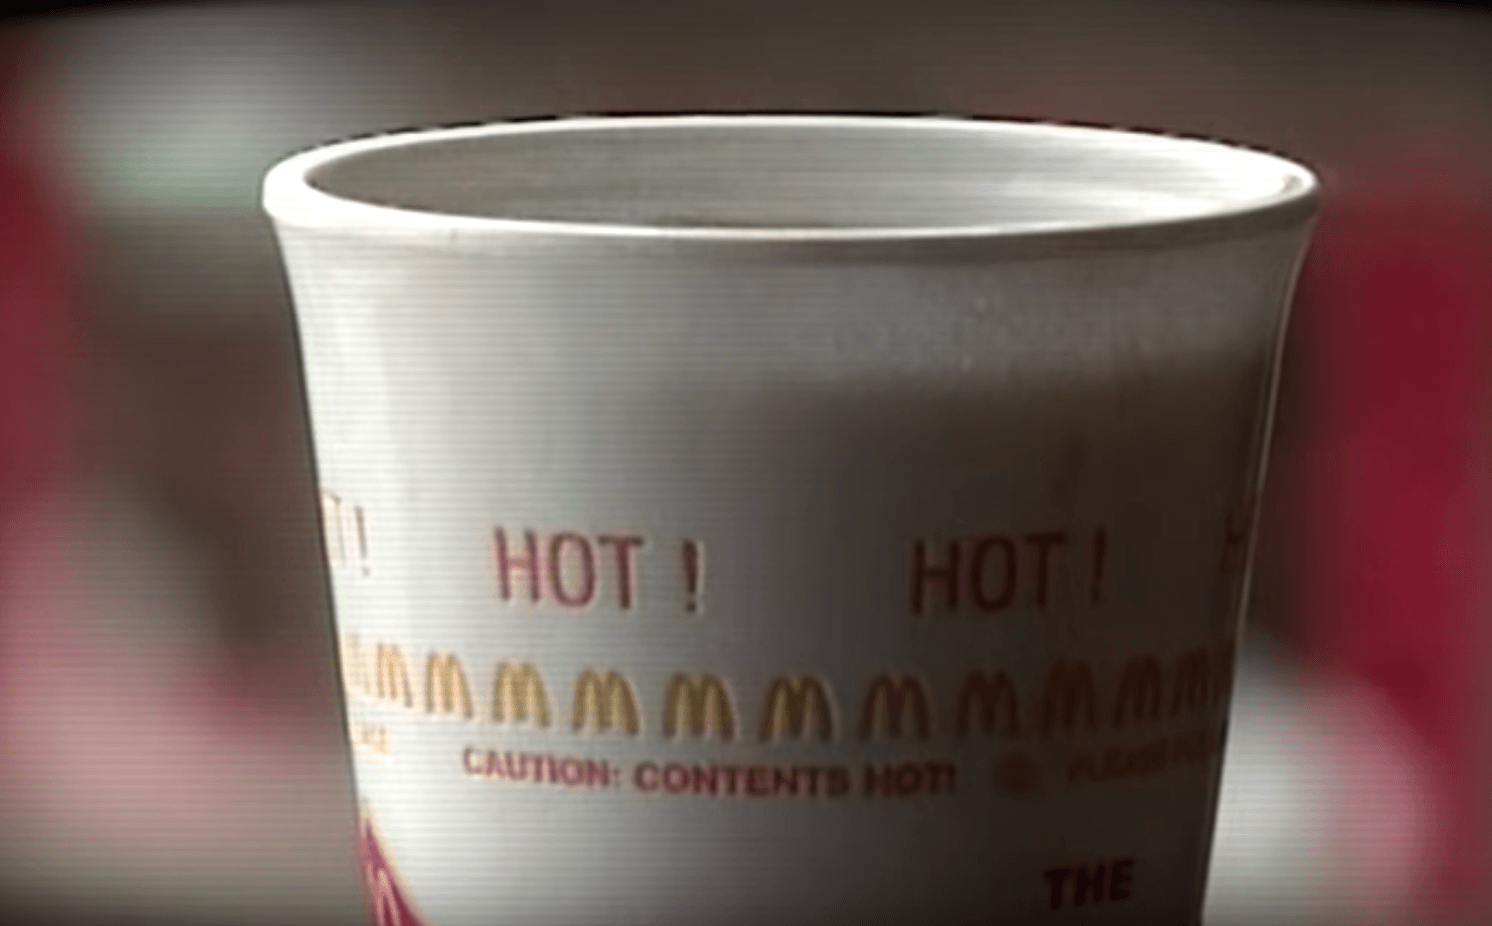 Here’s What Really Happened With That Infamous McDonald’s ‘Hot Coffee Lawsuit’